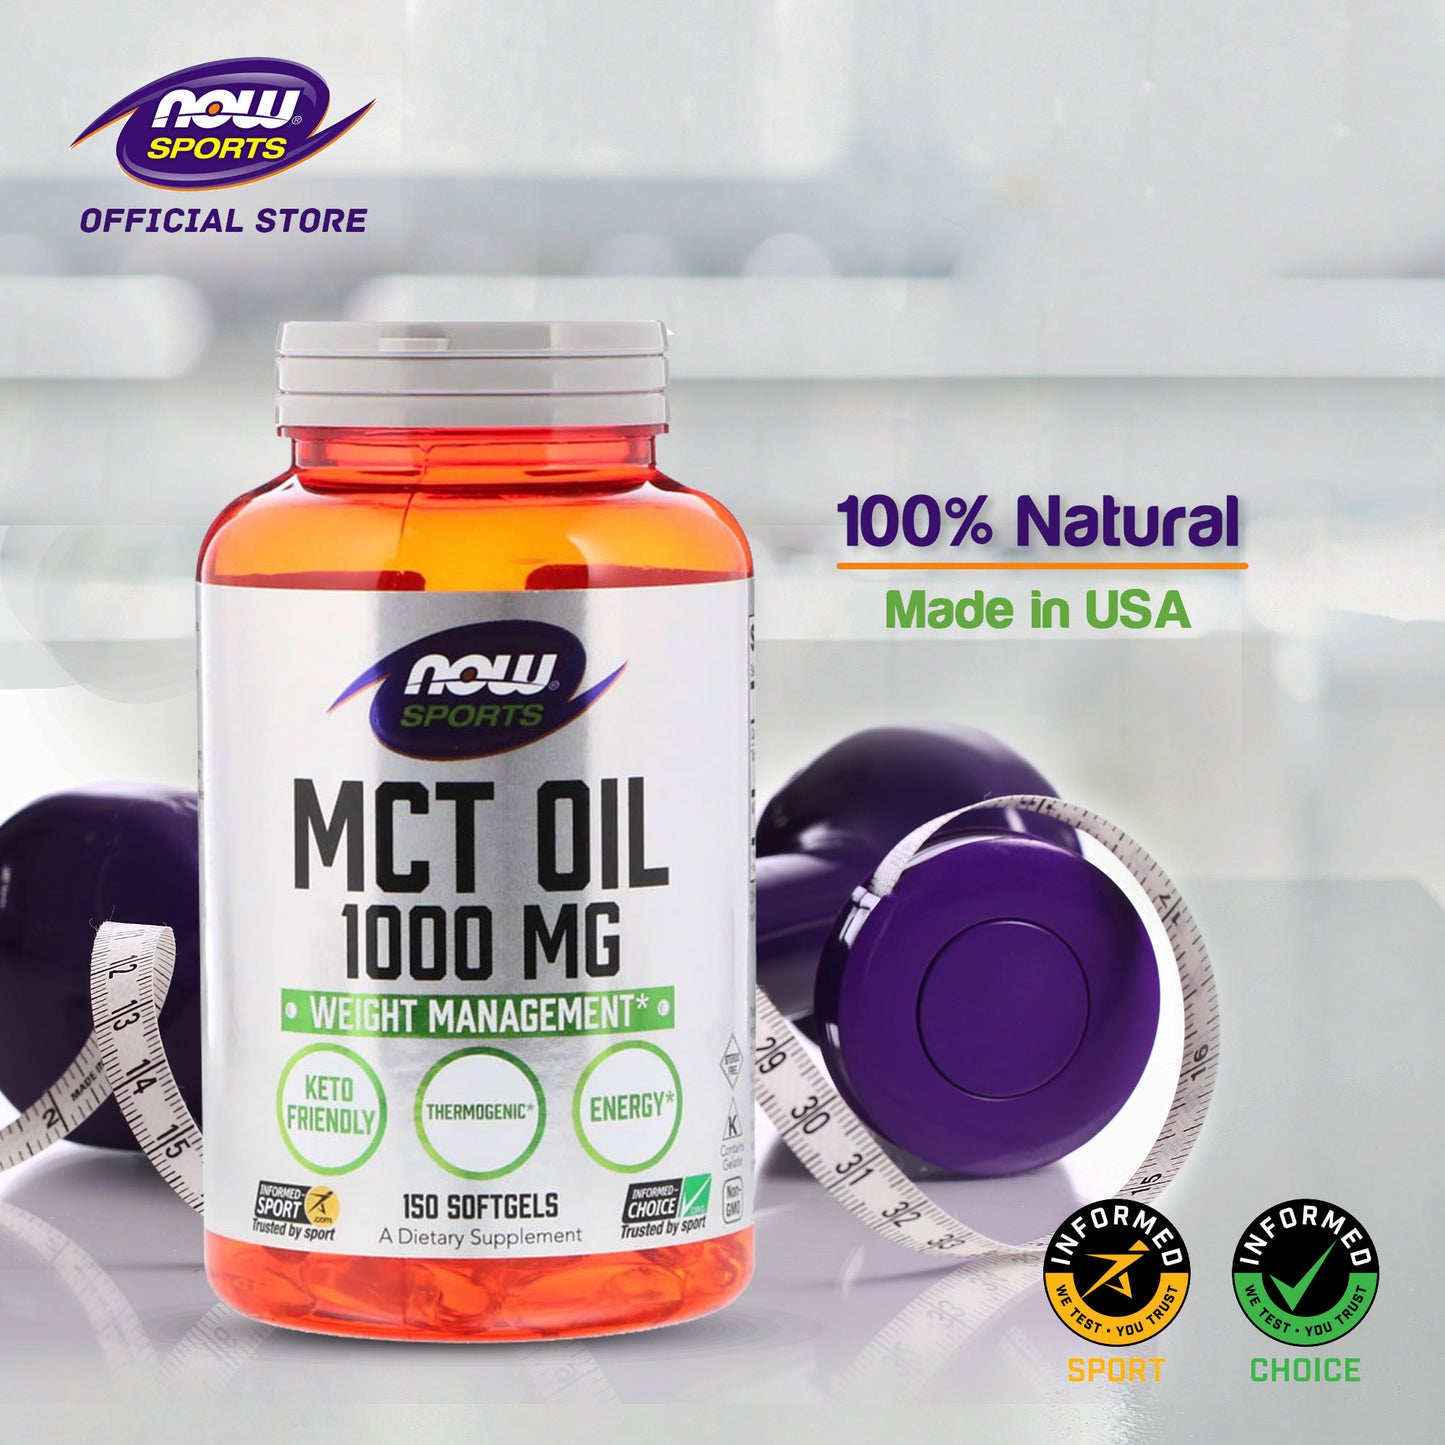 NOW FOODS Sports Nutrition, MCT (Medium-chain triglycerides) Oil 1,000 mg, Weight Management, 150 Softgels